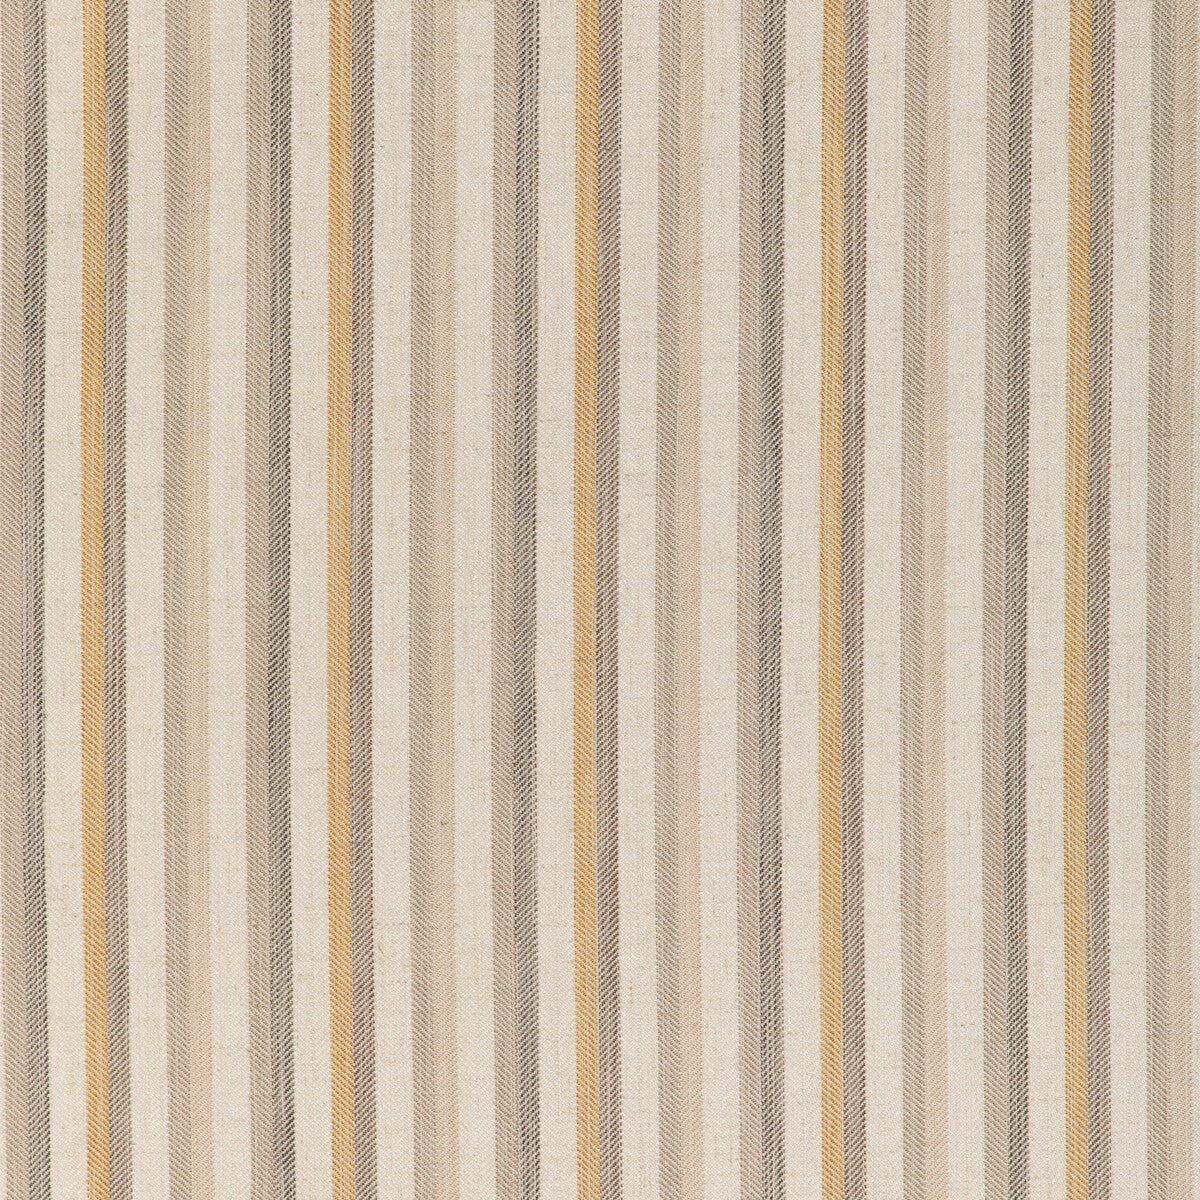 Kravet Design fabric in 37167-416 color - pattern 37167.416.0 - by Kravet Design in the Woven Colors collection